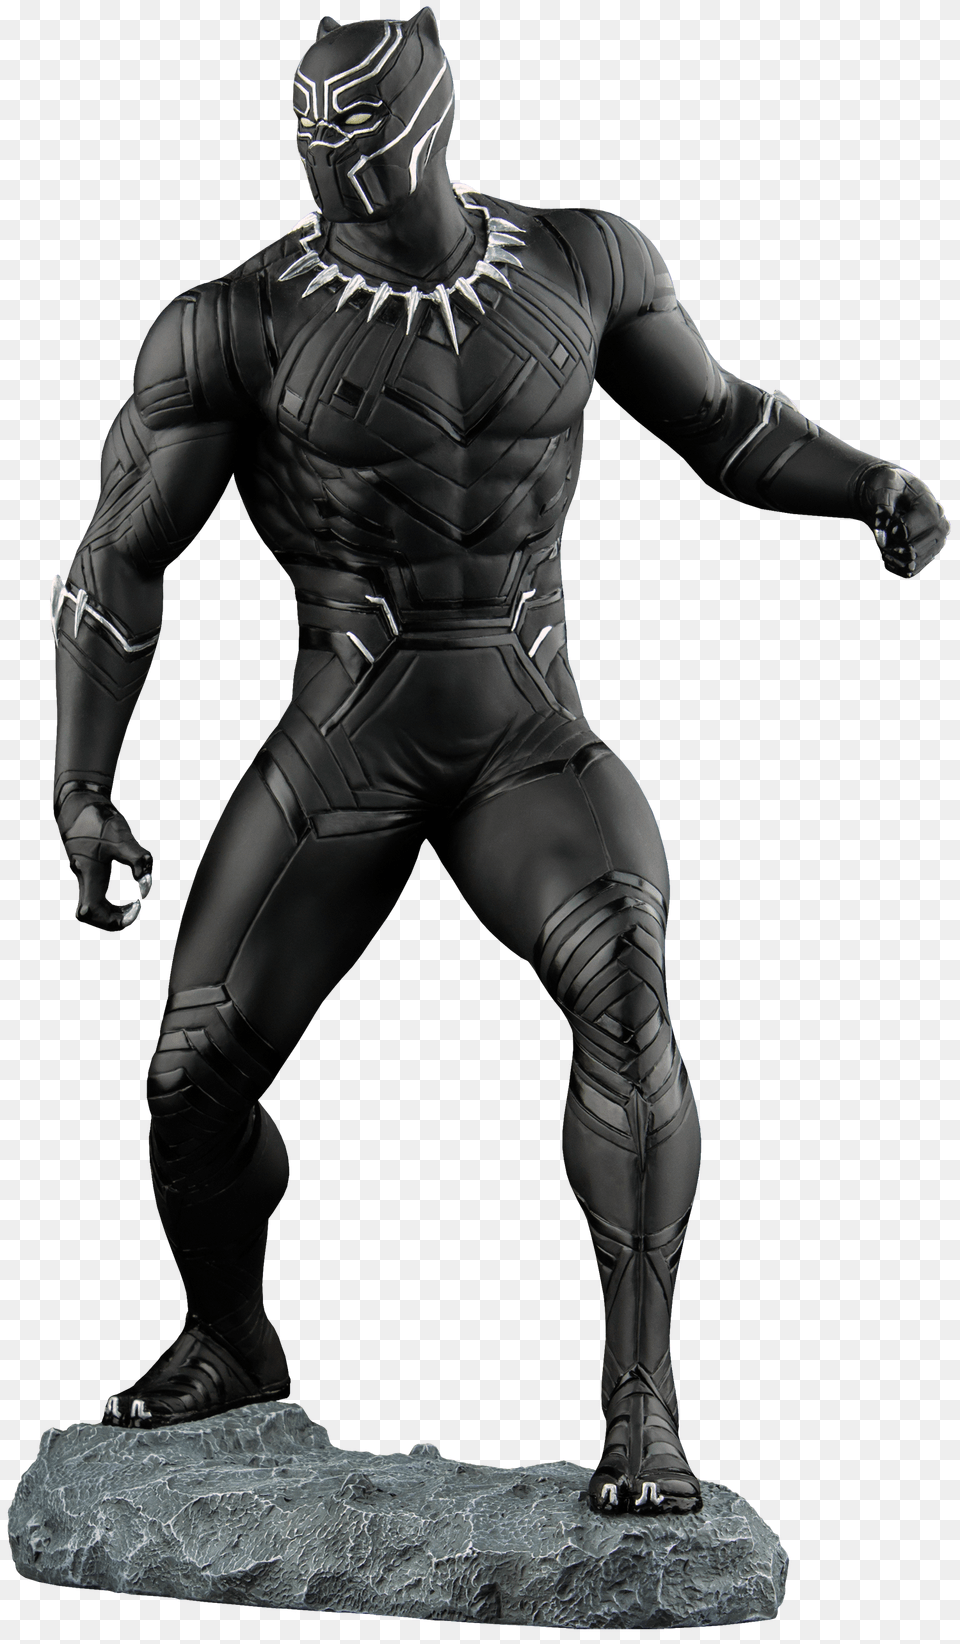 Captain America Civil War Statue Black Panther Scale, Adult, Male, Man, Person Free Transparent Png